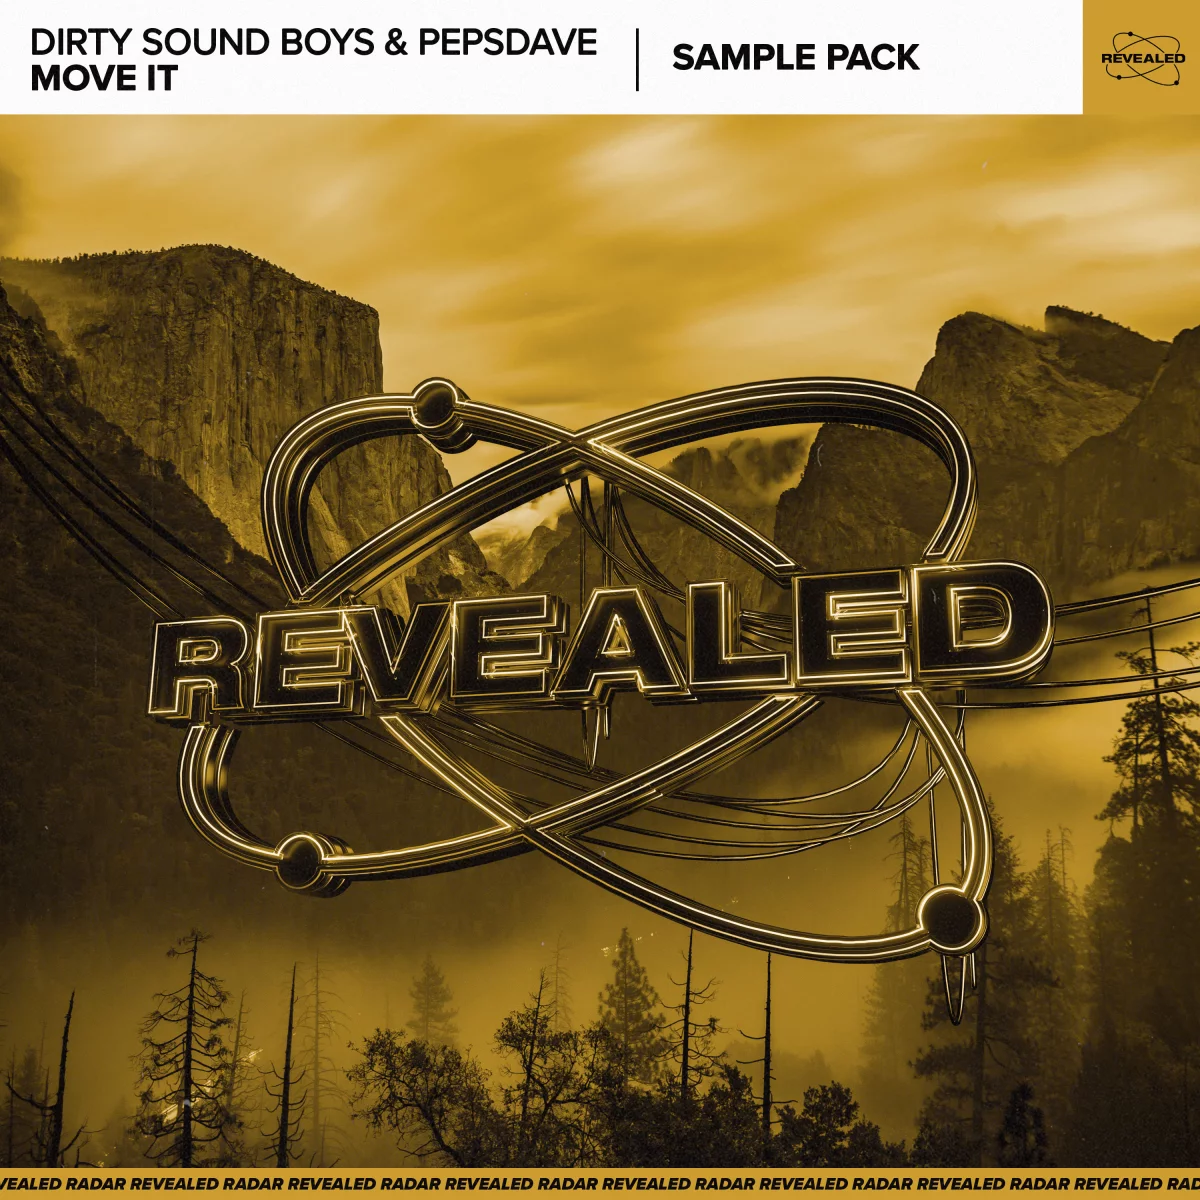 Move It [Sample Pack] - Dirty Sound Boys⁠ PepsDave⁠ 